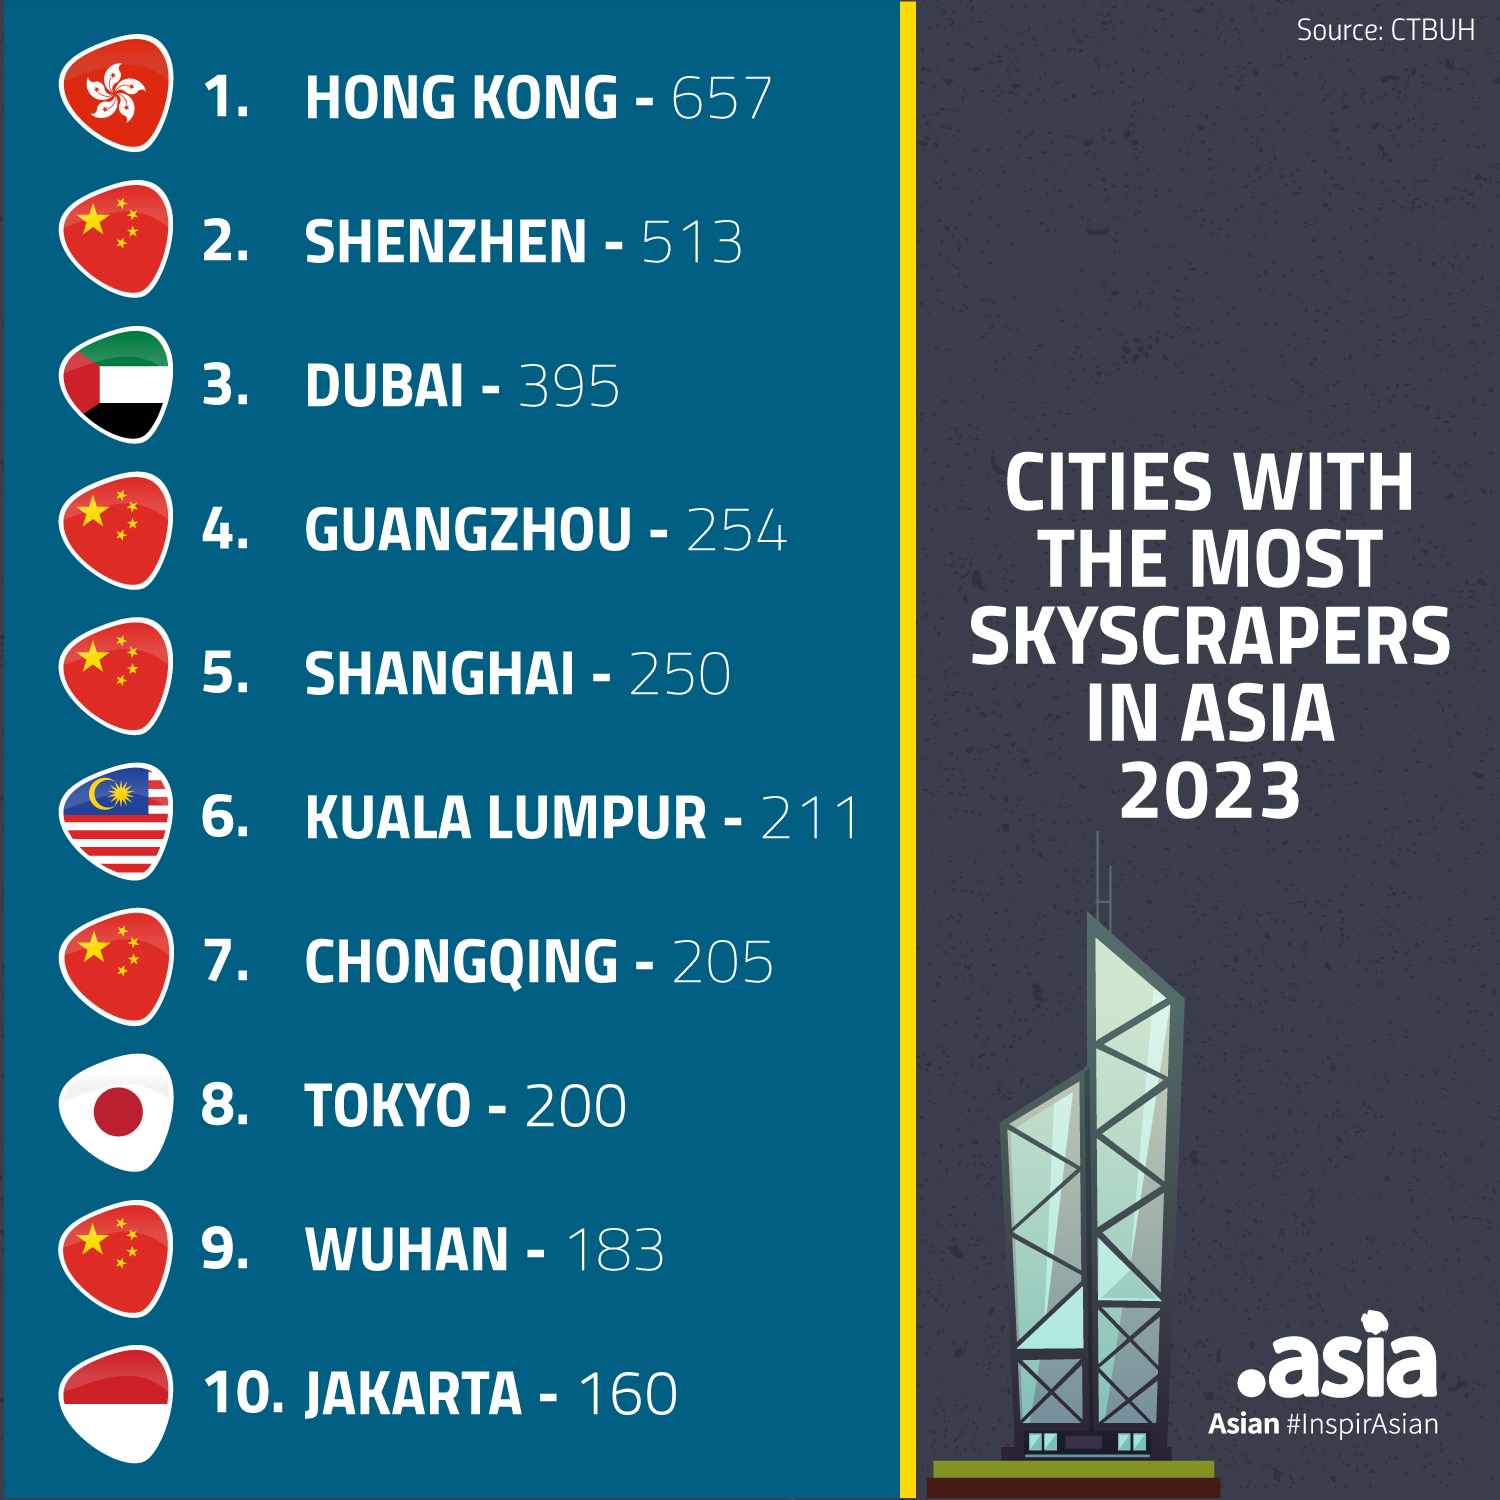 Image: Cities withi most skycrapers in Asia 2023